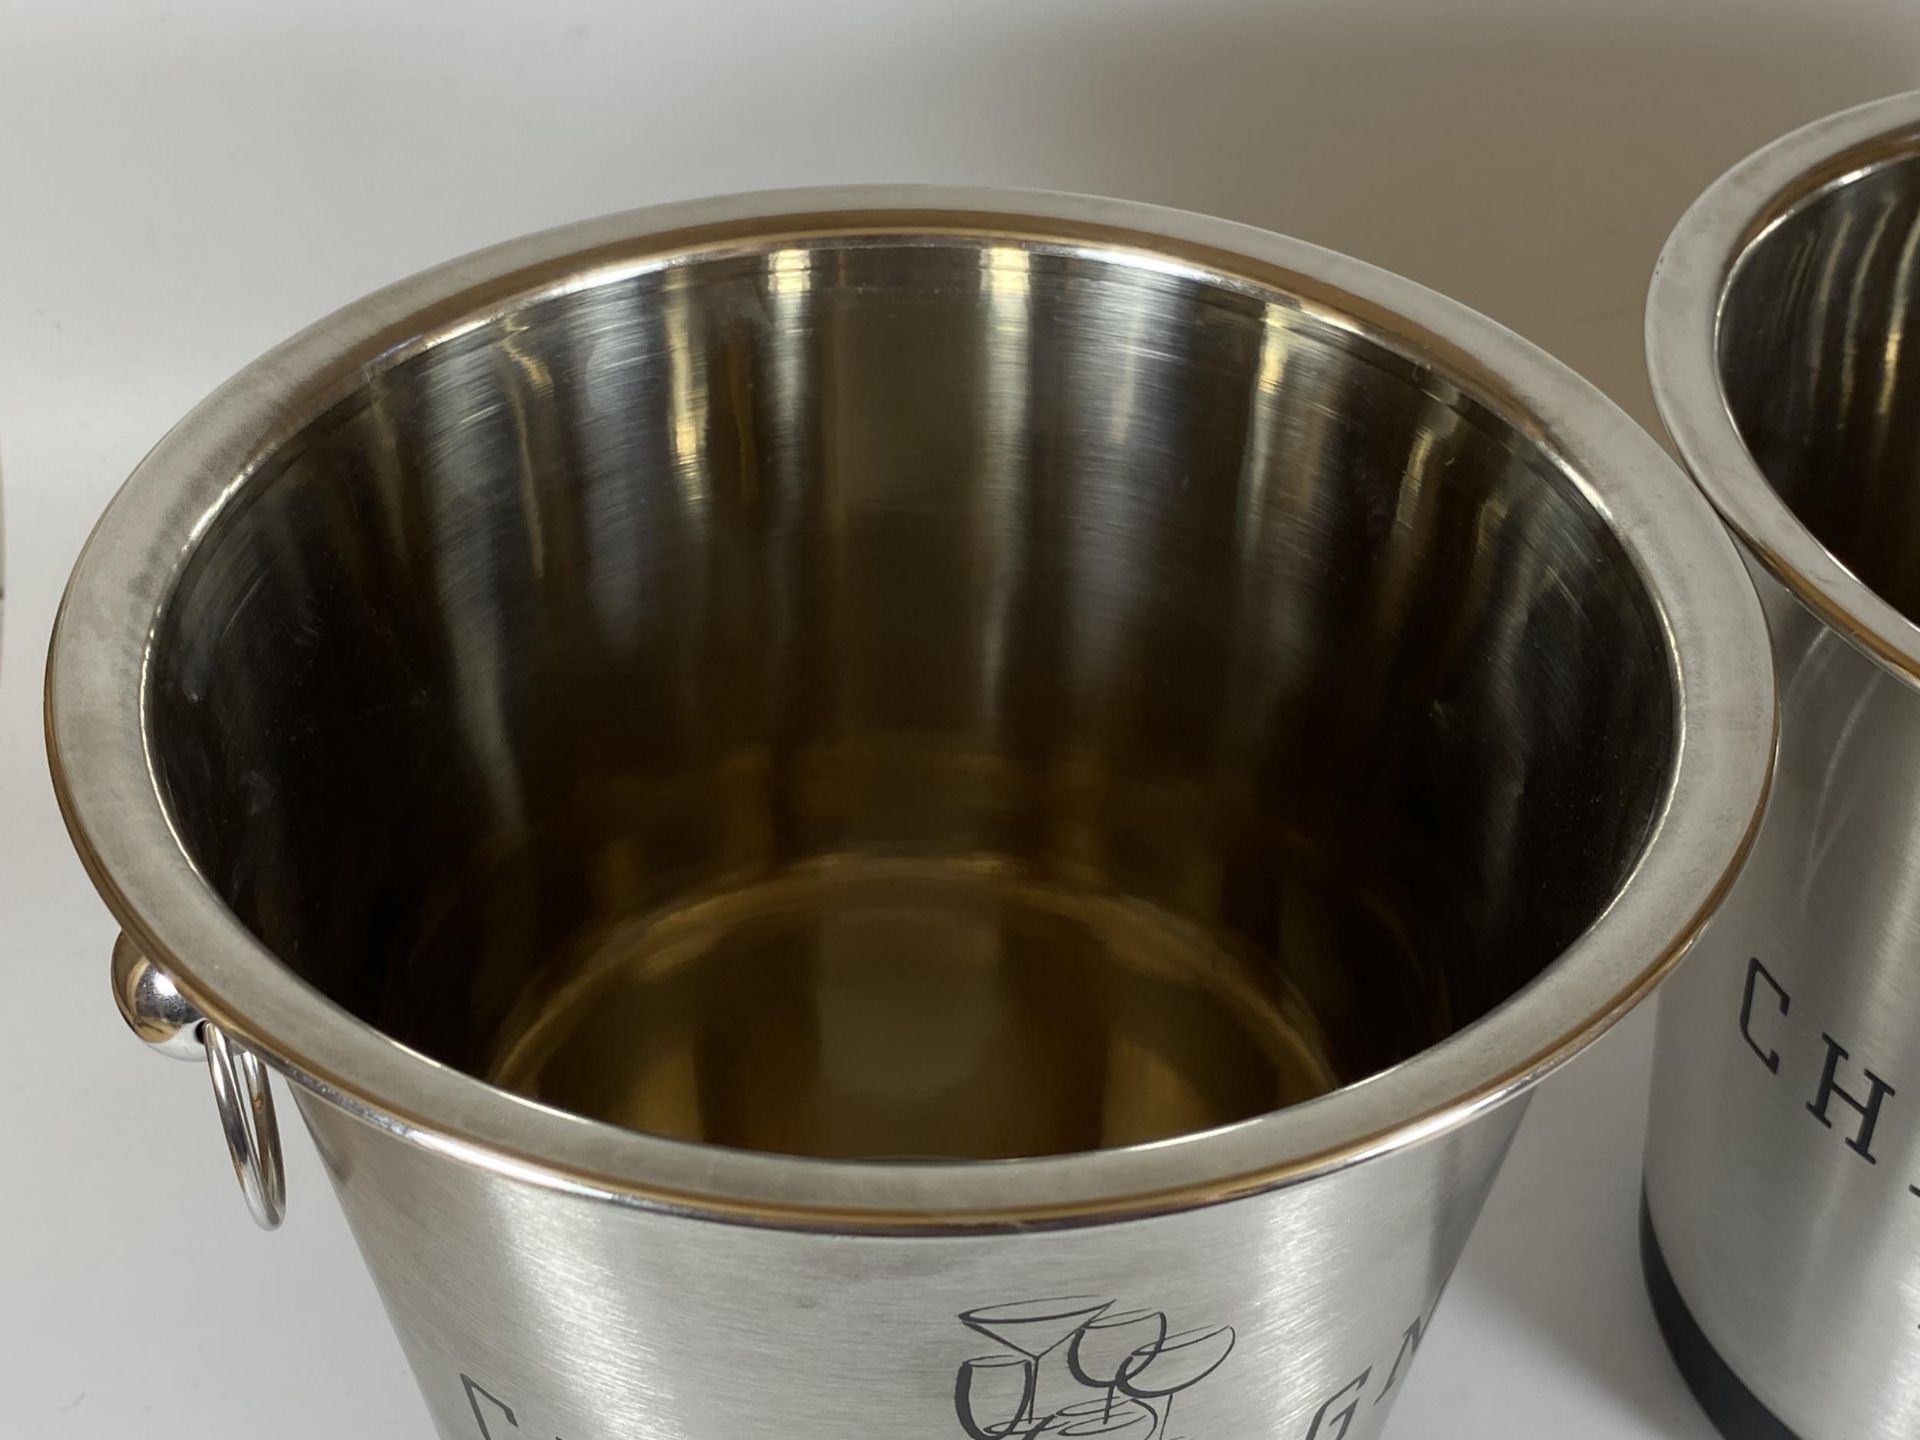 A PAIR OF CHROME EFFECT CHAMPAGNE CUVEE GRAND CRU ICE BUCKETS, HEIGHT 21CM - Image 4 of 5